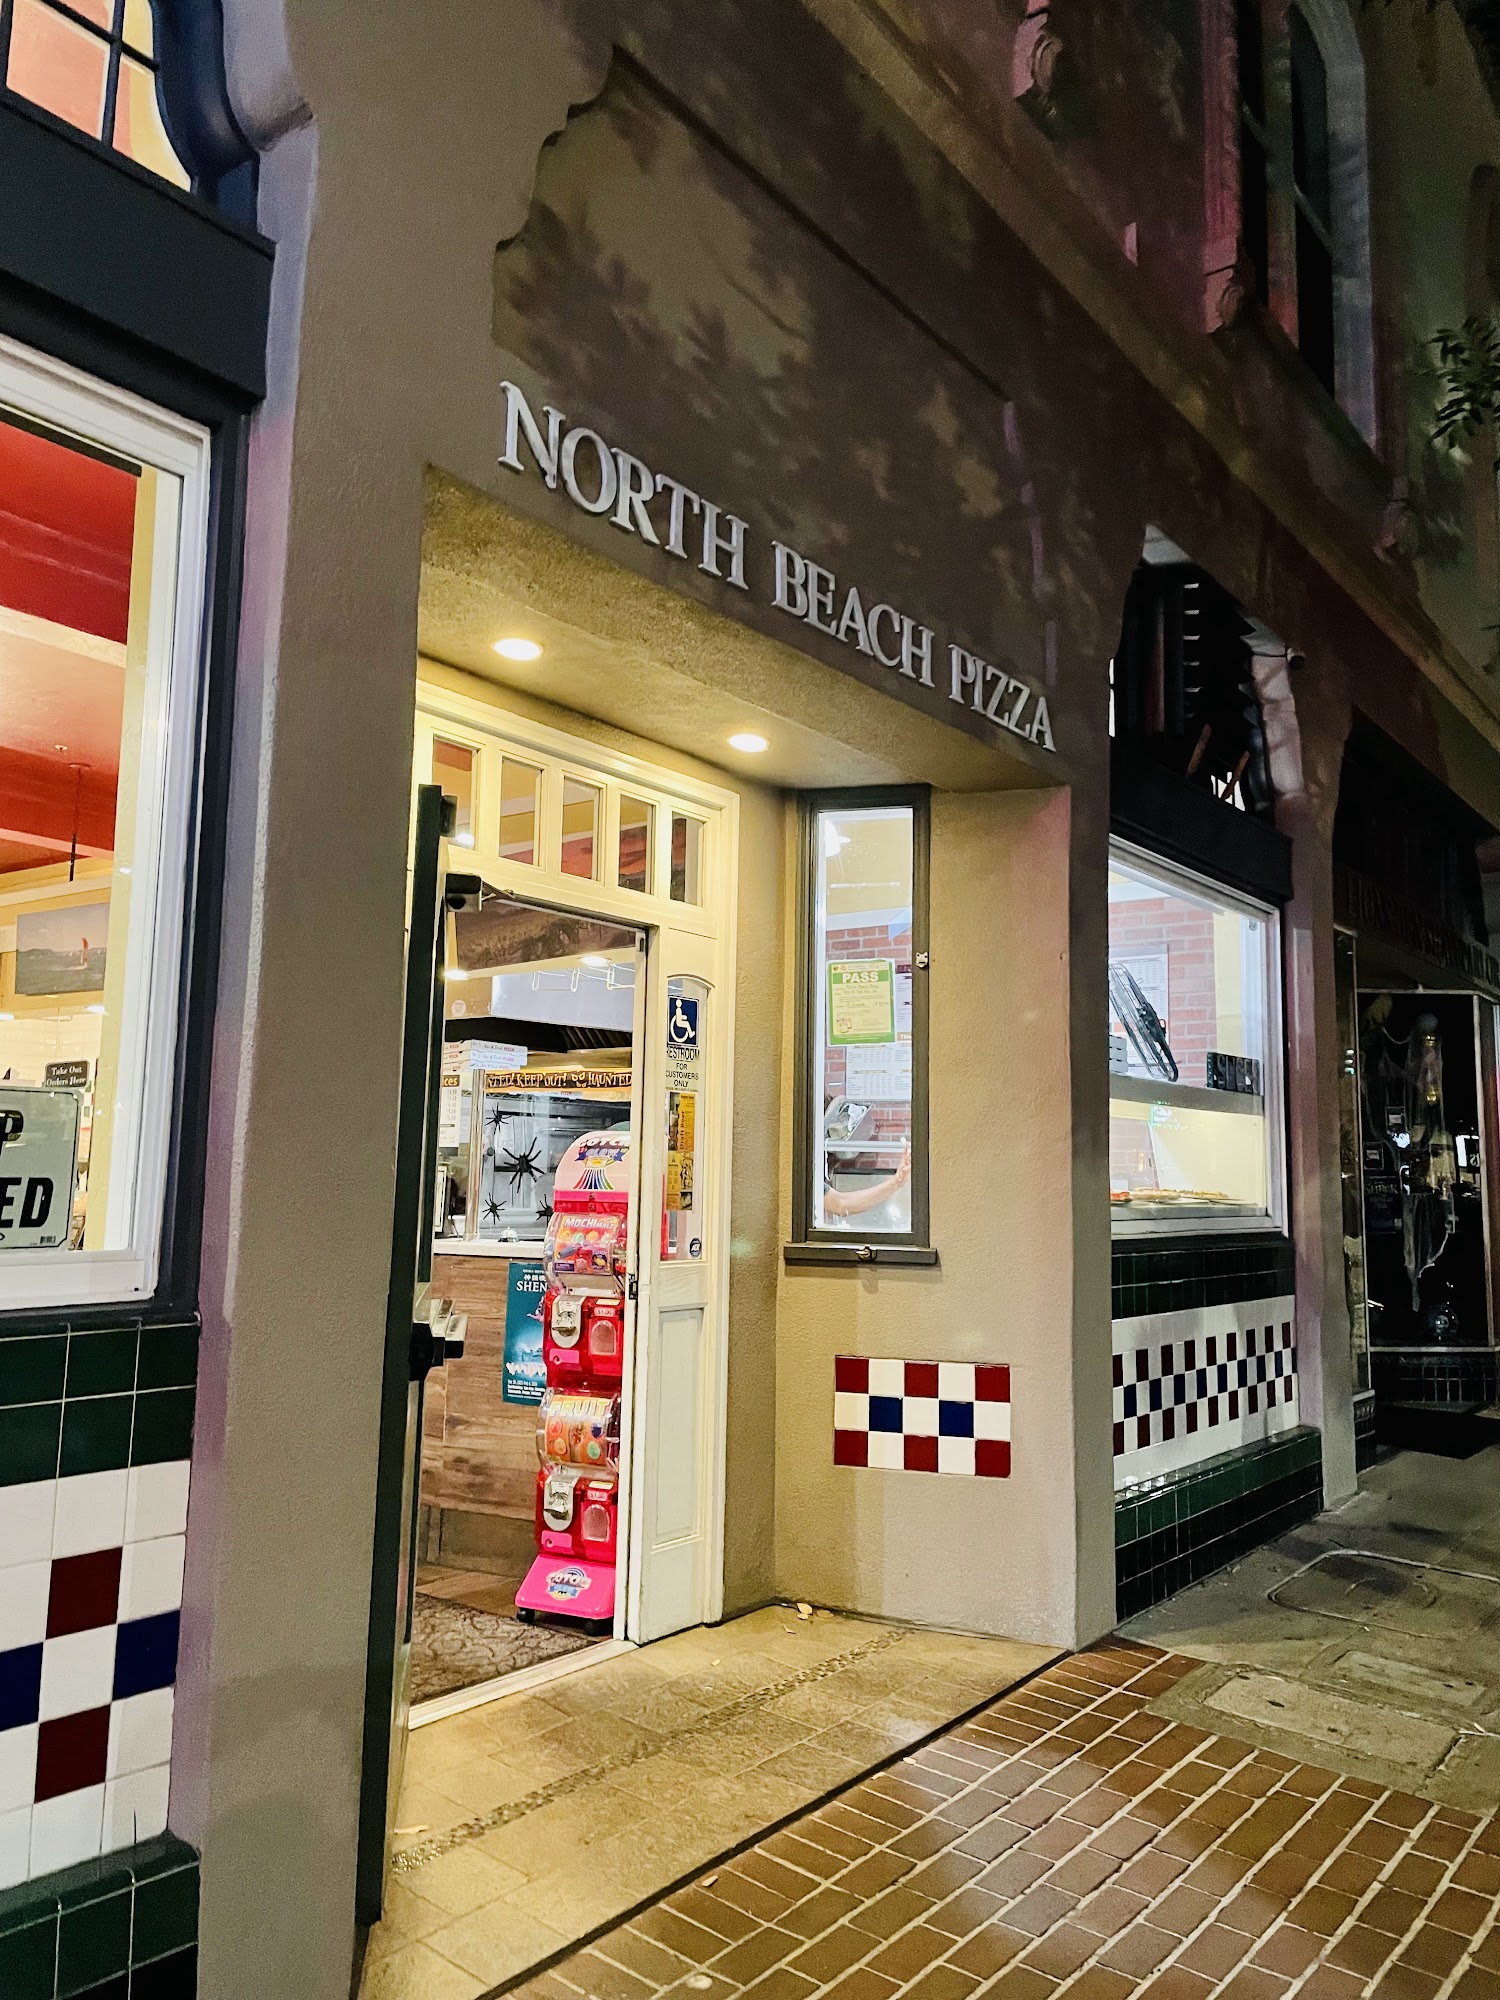 North Beach Pizza - Online Pizza Delivery, Take Out Near San Mateo